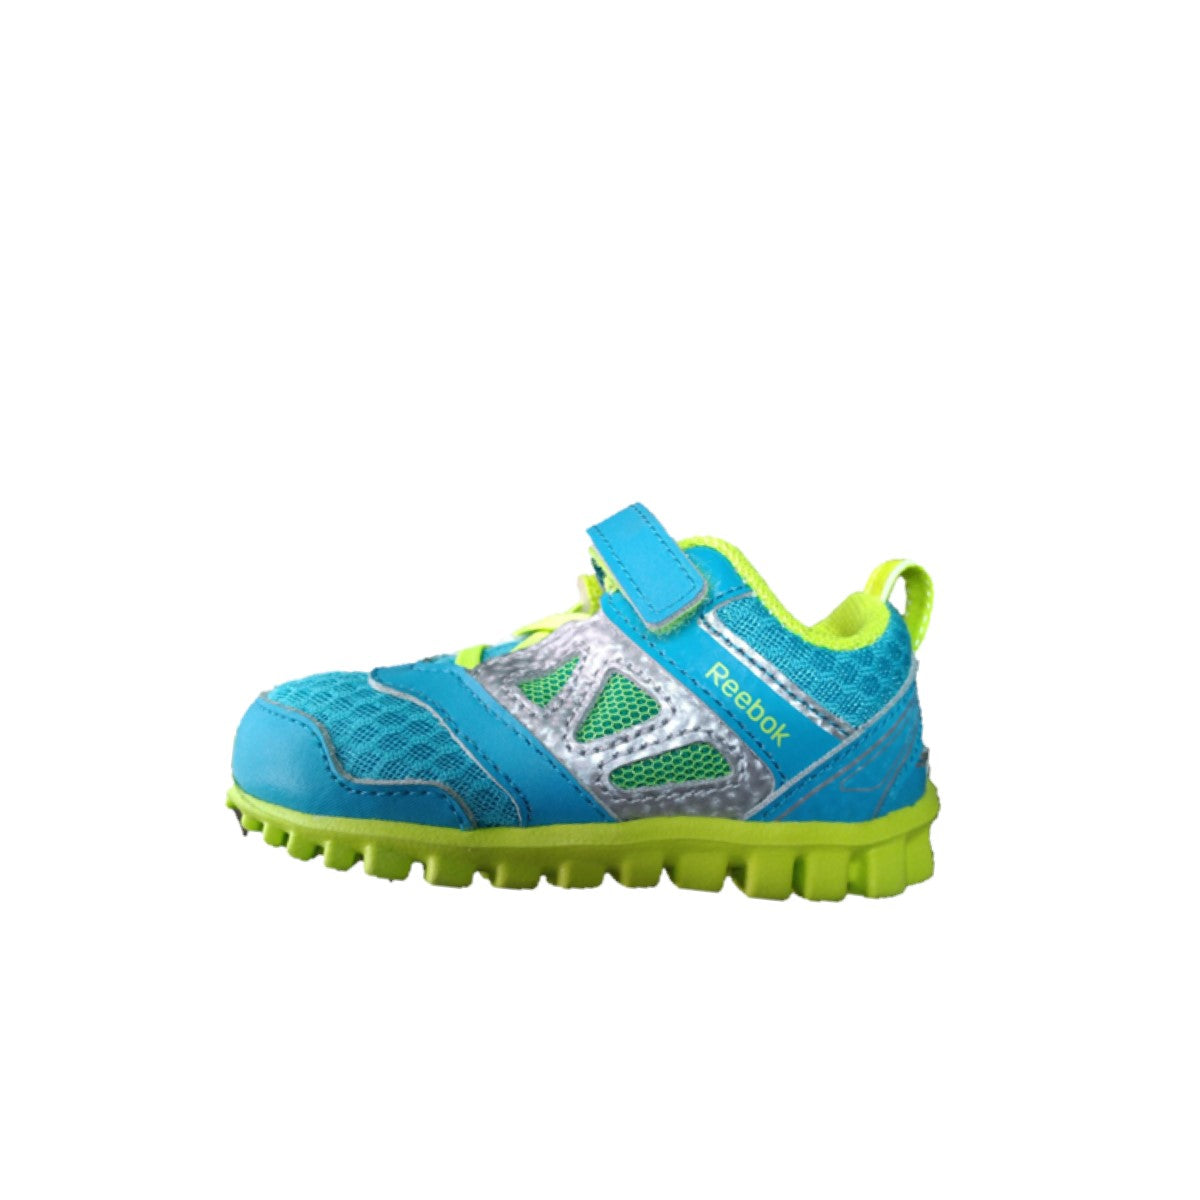 REEBOK M43040 REALFLEX SPEED 3.0 INF'S (Medium) Blue/Yellow/Silver Mesh & Synthetic Running Shoes